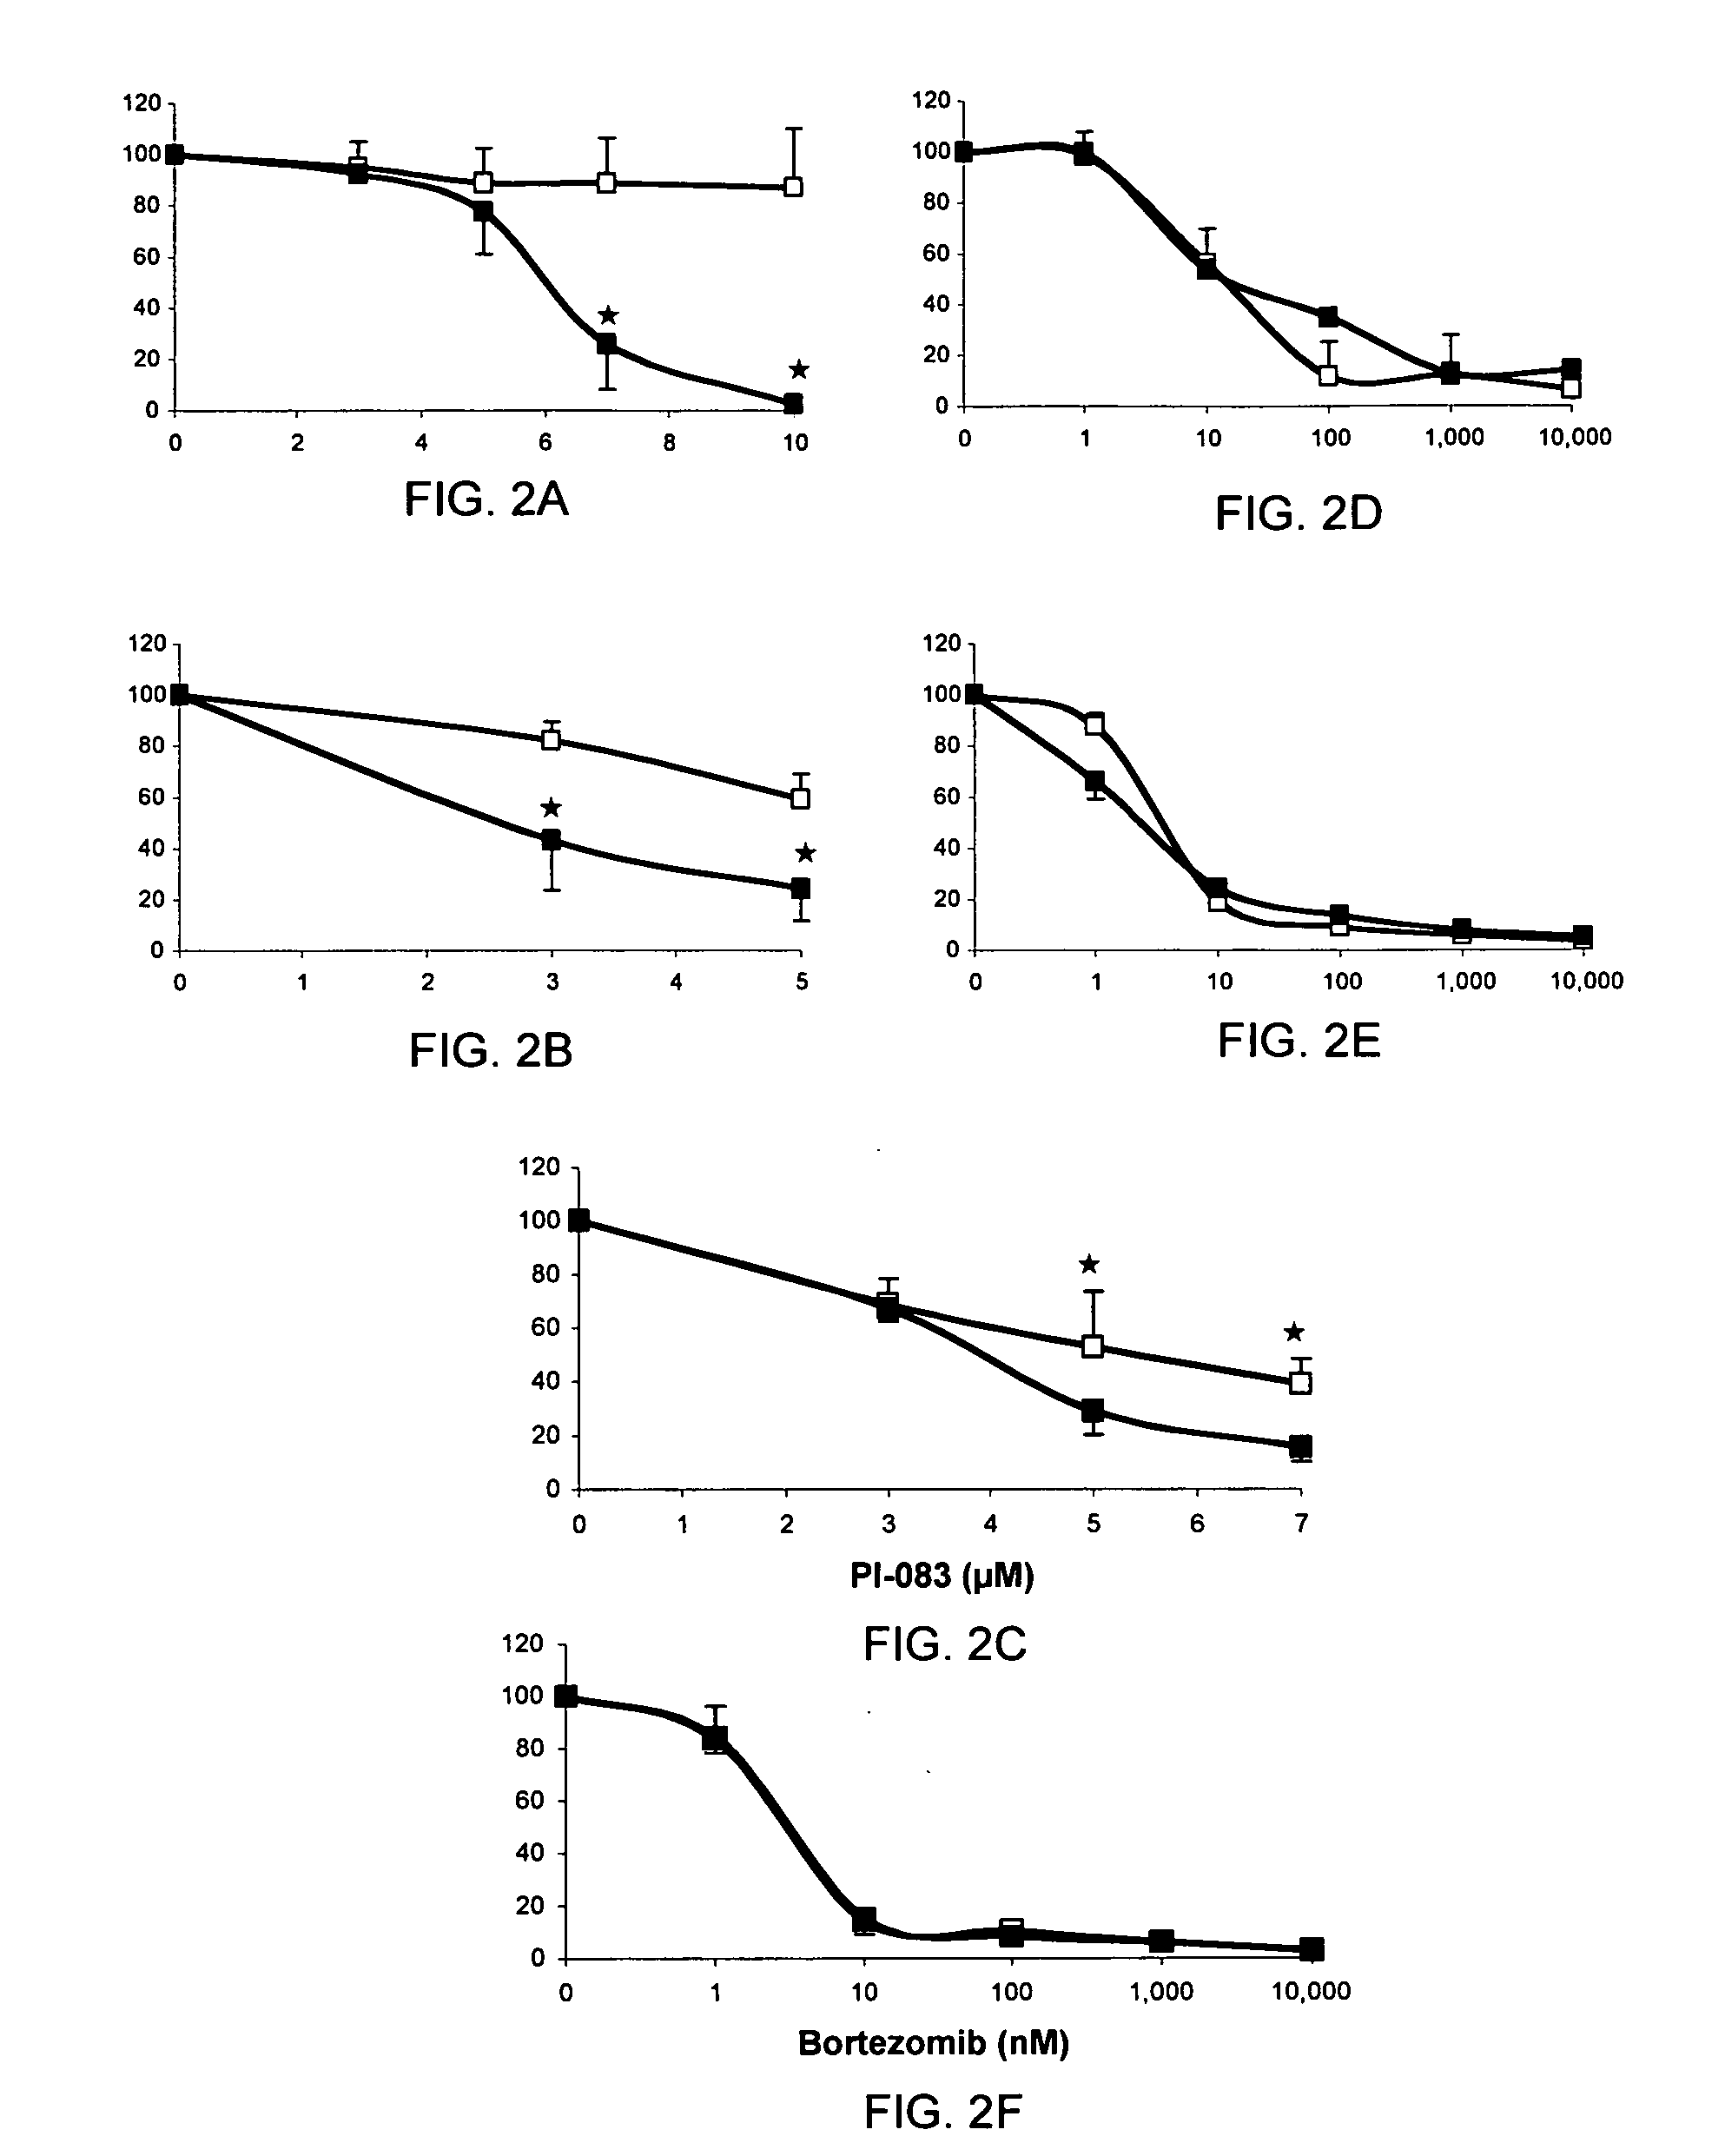 Proteasome inhibitors for selectively inducing apoptosis in cancer cells